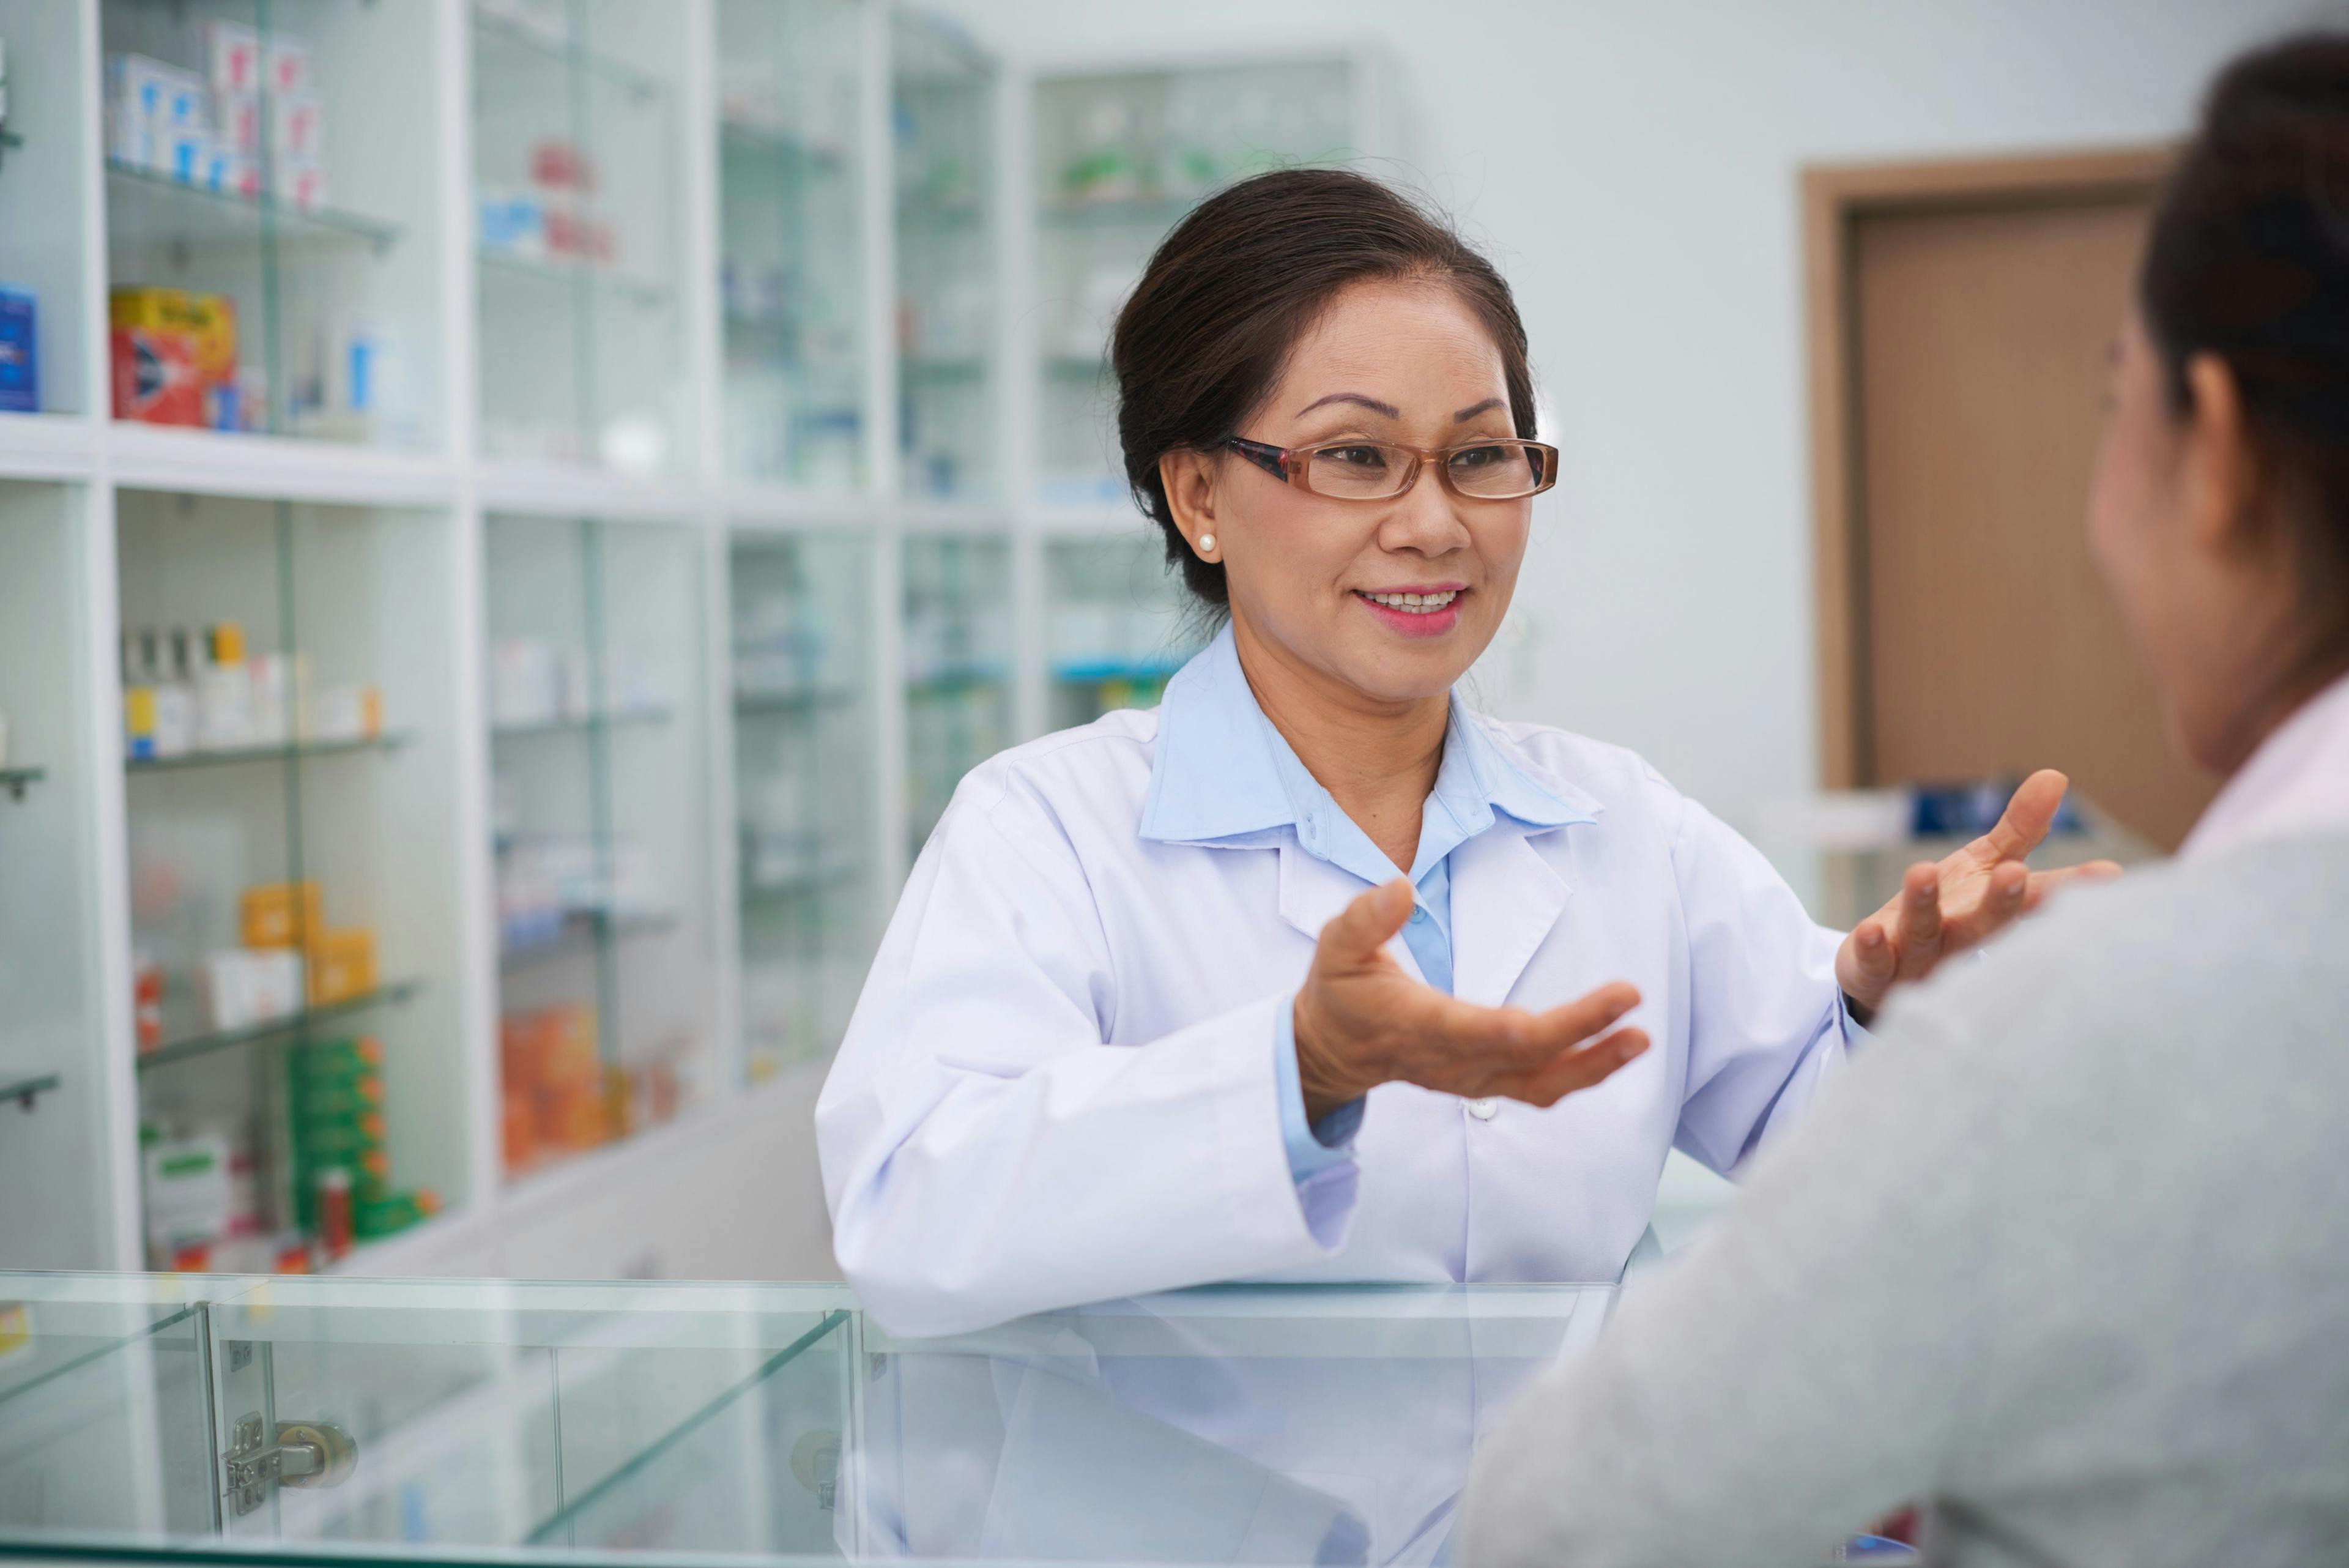 Culturally Competent Care is a Large Part of Pharmacy Care, Deepening Community Connections